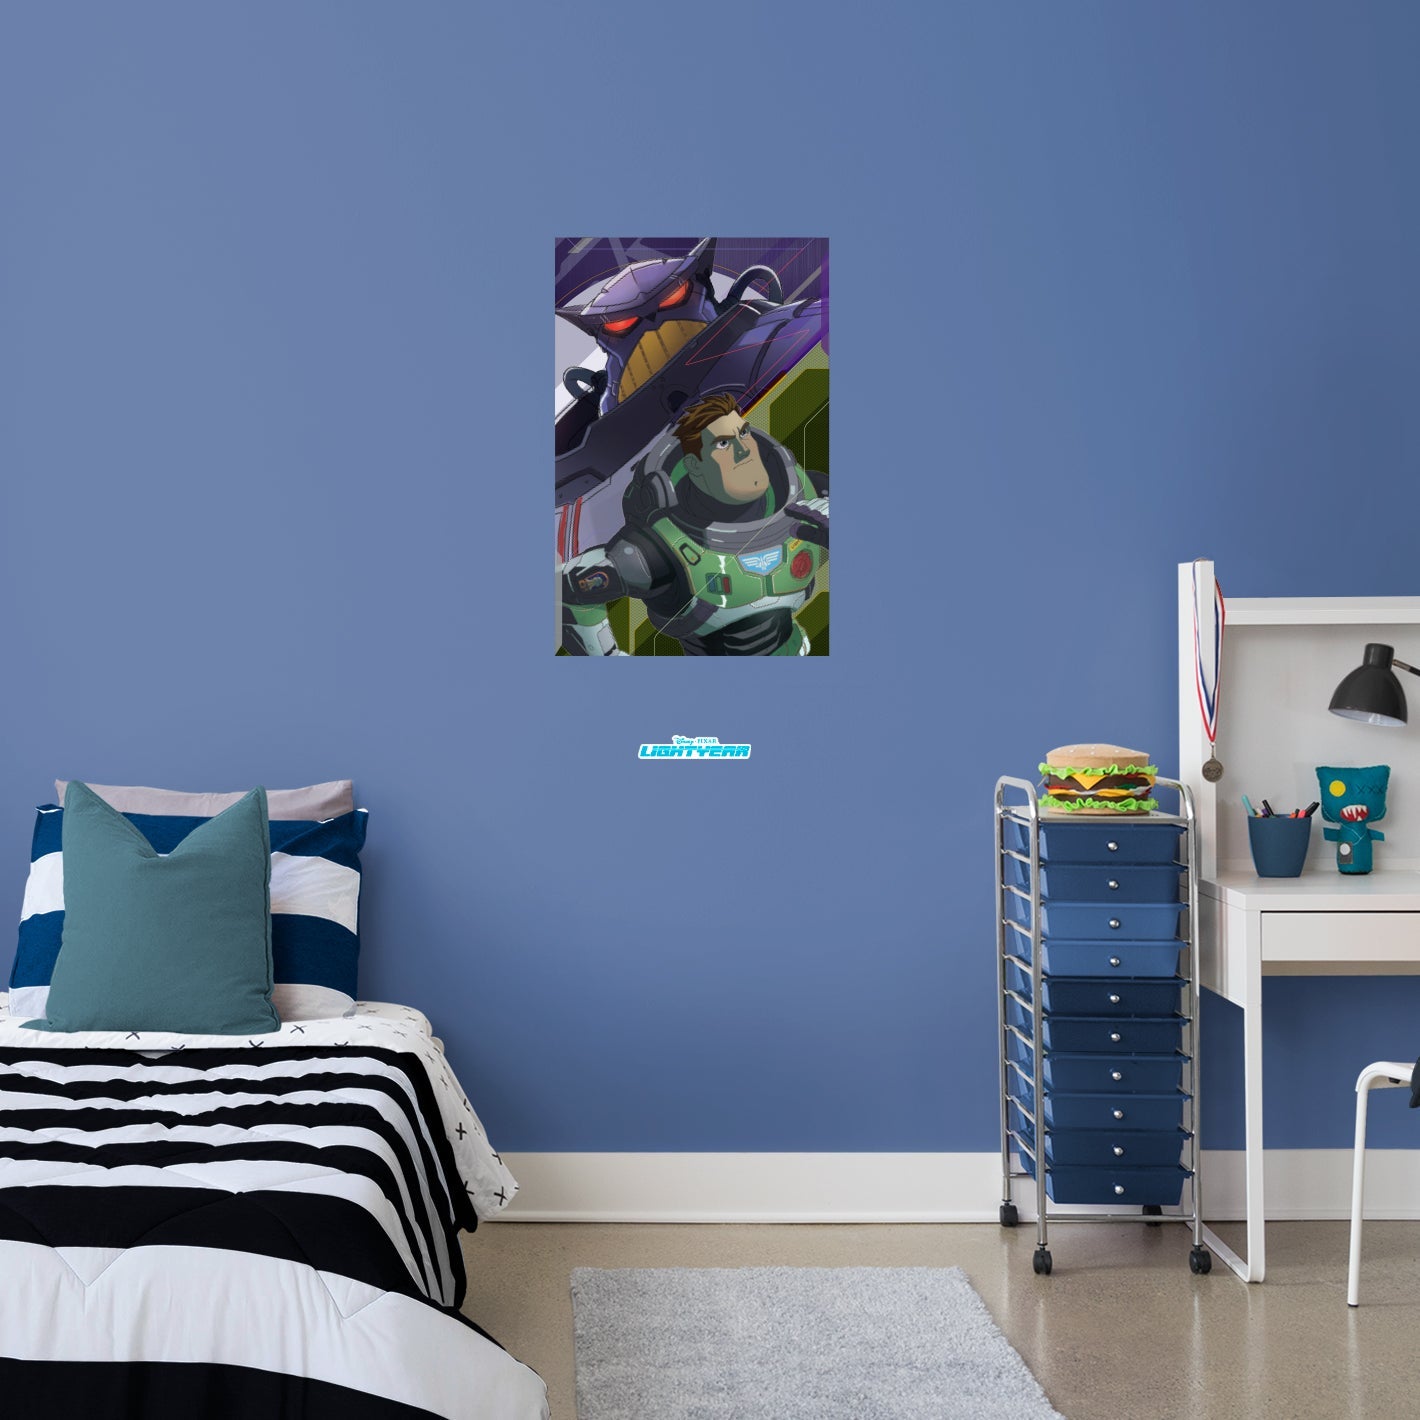 Lightyear: Buzz Lightyear Red Alert- Zurg & Buzz Poster - Officially Licensed Disney Removable Adhesive Decal